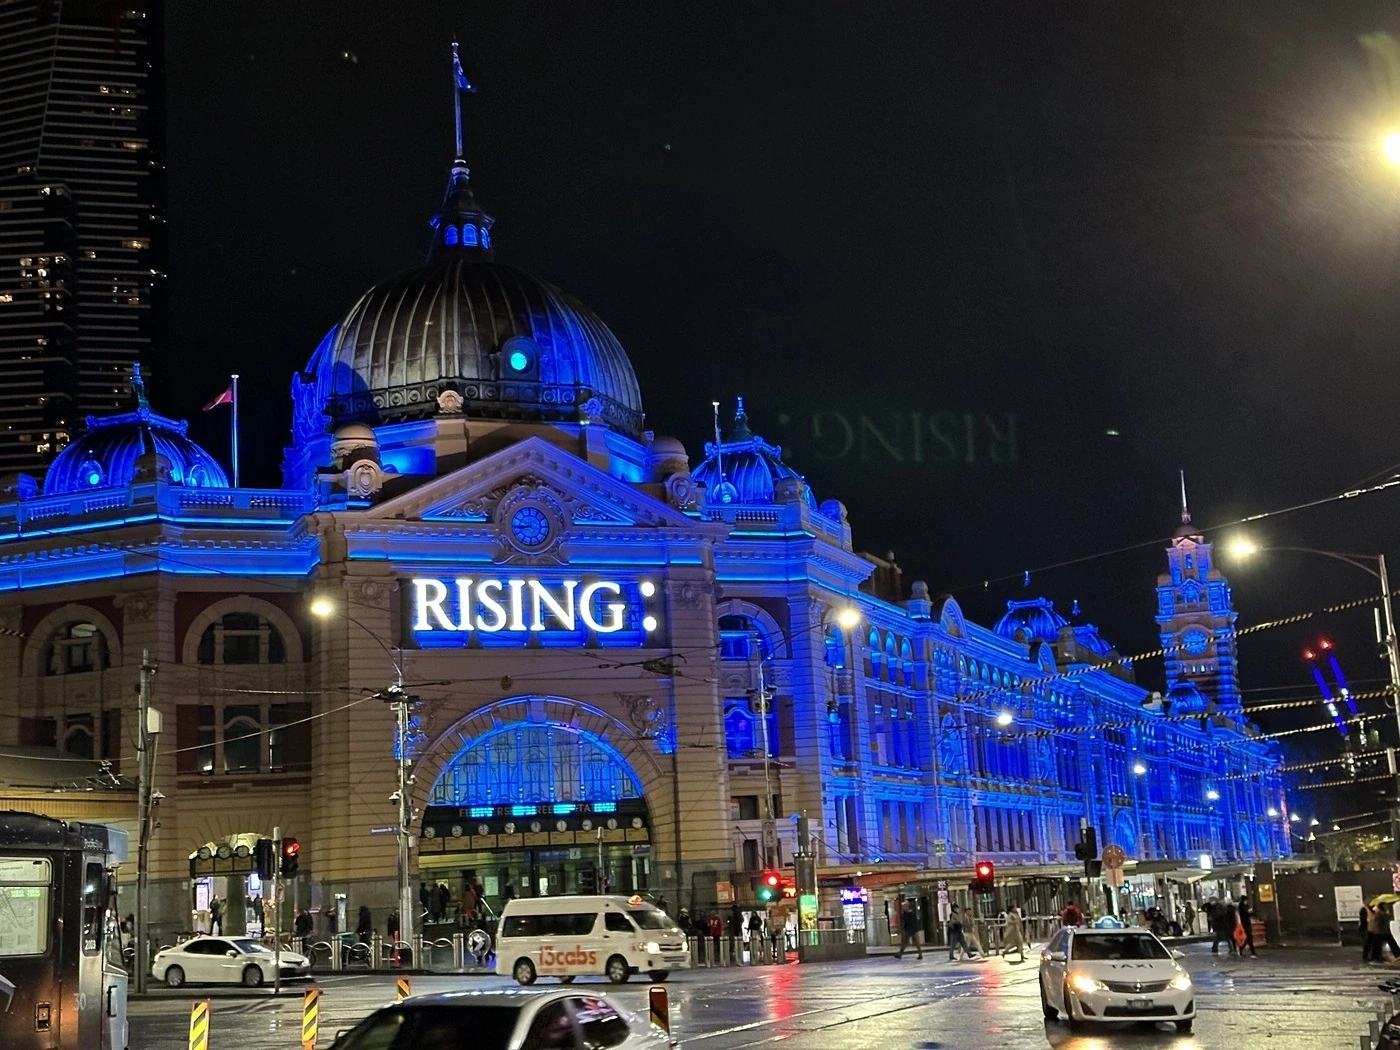 Flinders St lit up at night for Rising